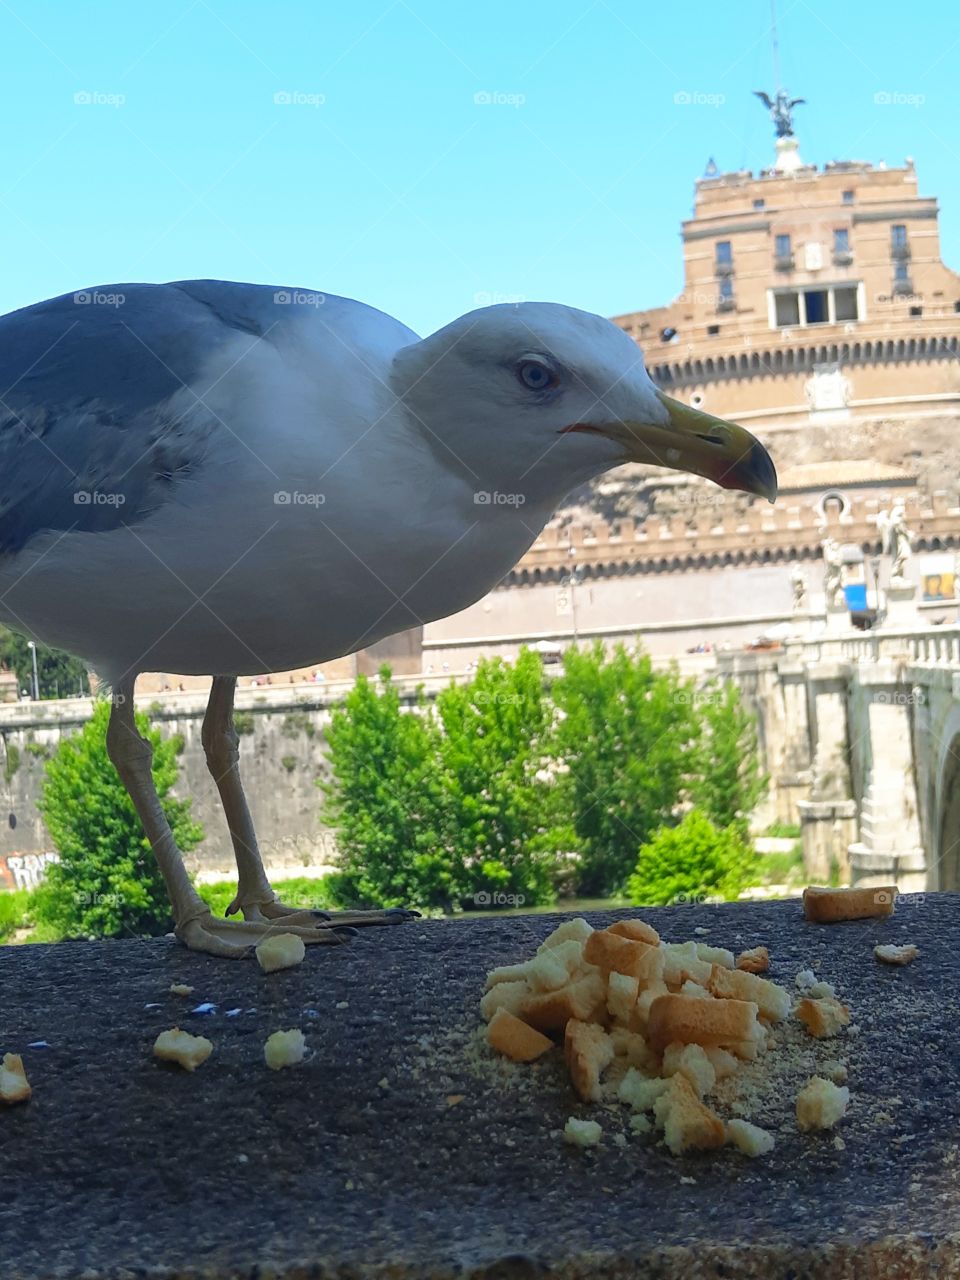 A plump seagull eating some treat